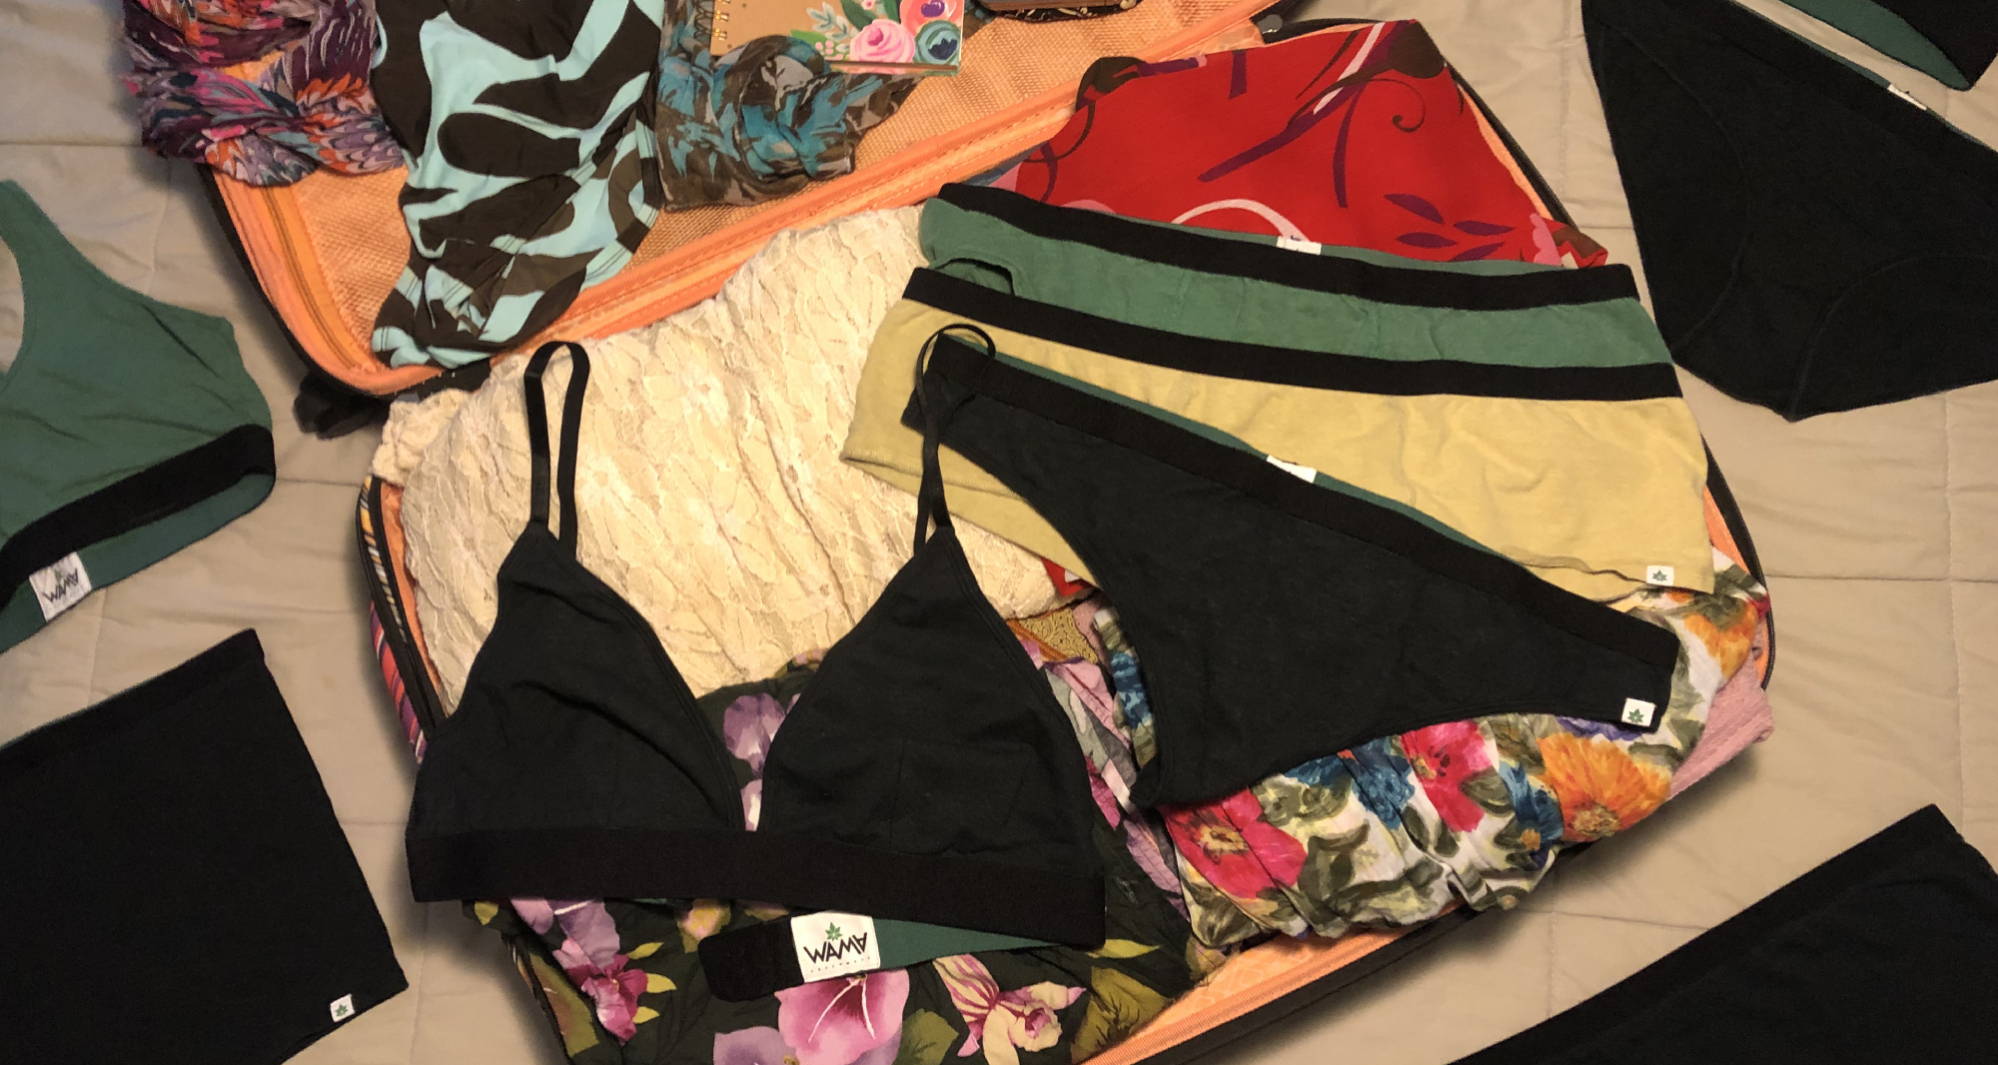 A suitcase filled with bright clothing and WAMA Underwear for a Florida Packing List.